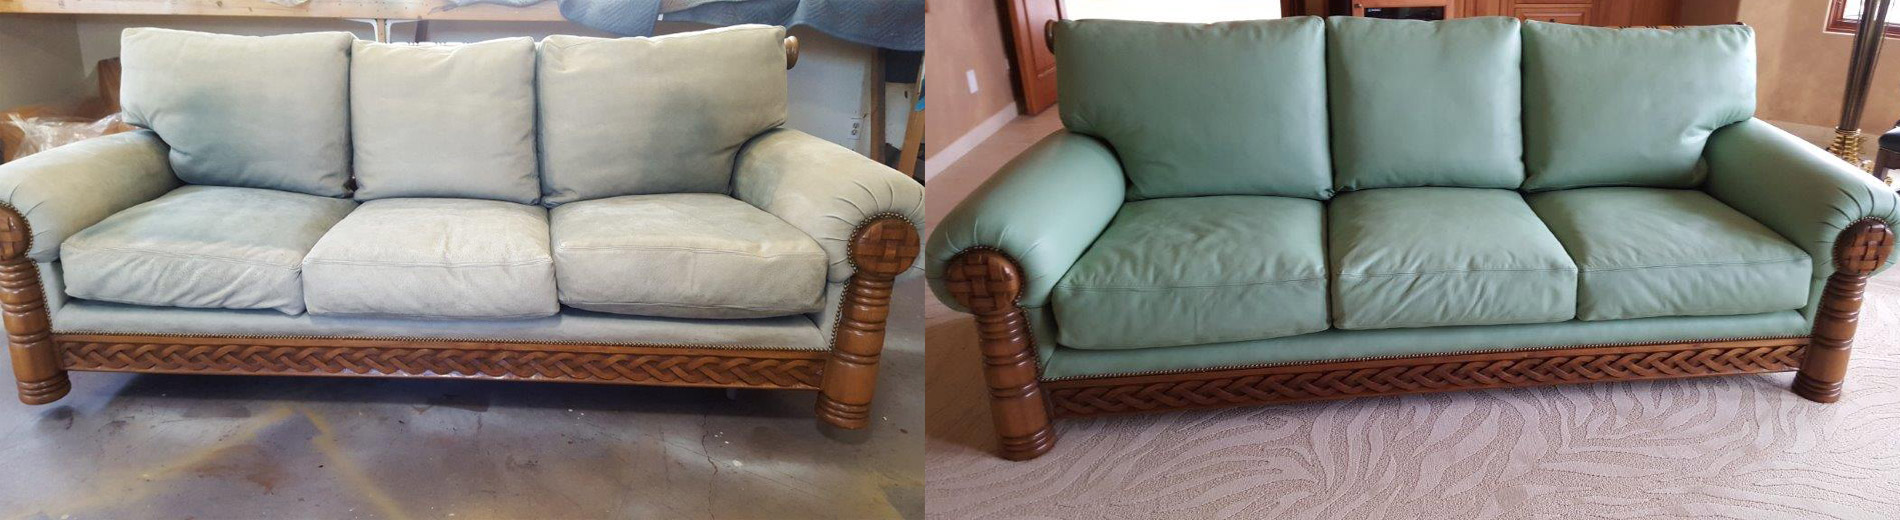 Leather Furniture Repair In San Diego, Leather Couches San Diego